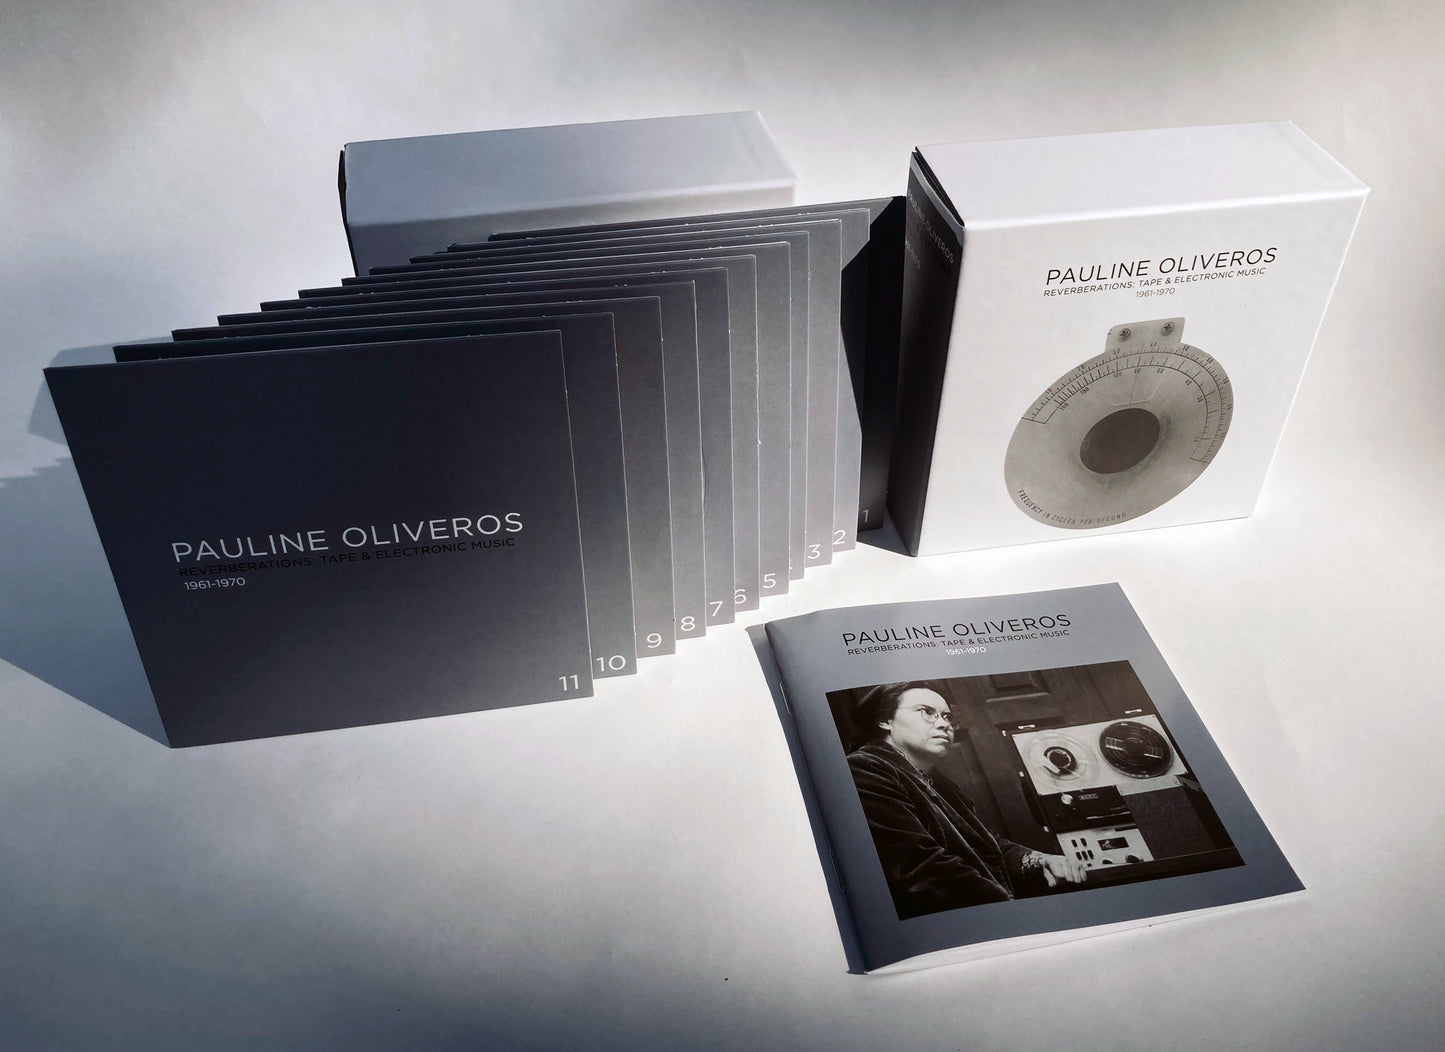 Pauline Oliveros - Reverberations: Tape & Electronic Music 1961-1970 - 11CD